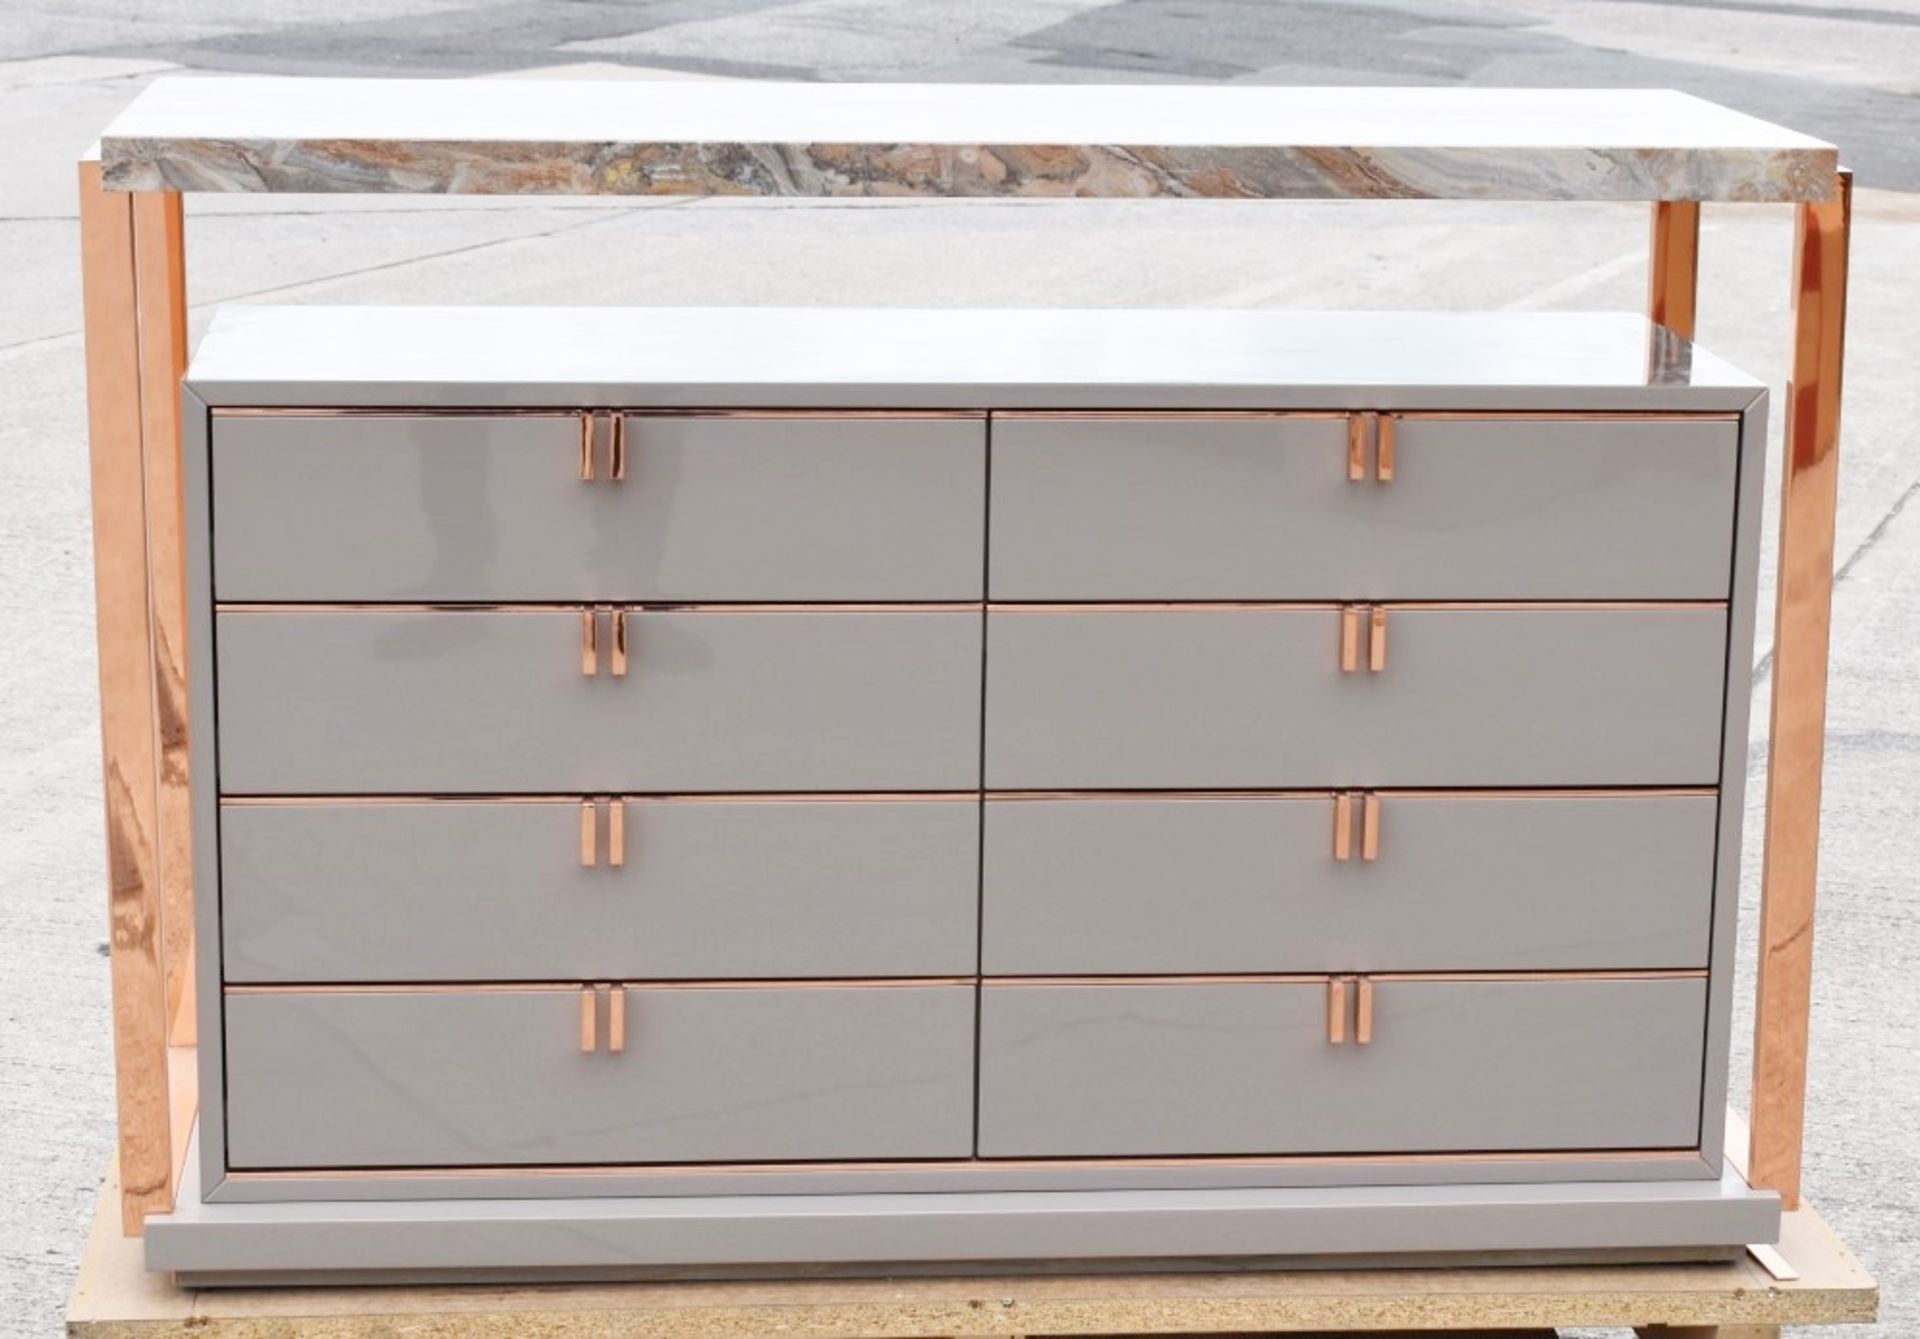 1 x FRATO 'LEXTON' Luxury Custom Ordered Marble Topped Chest of Drawers With Rose Gold Detail